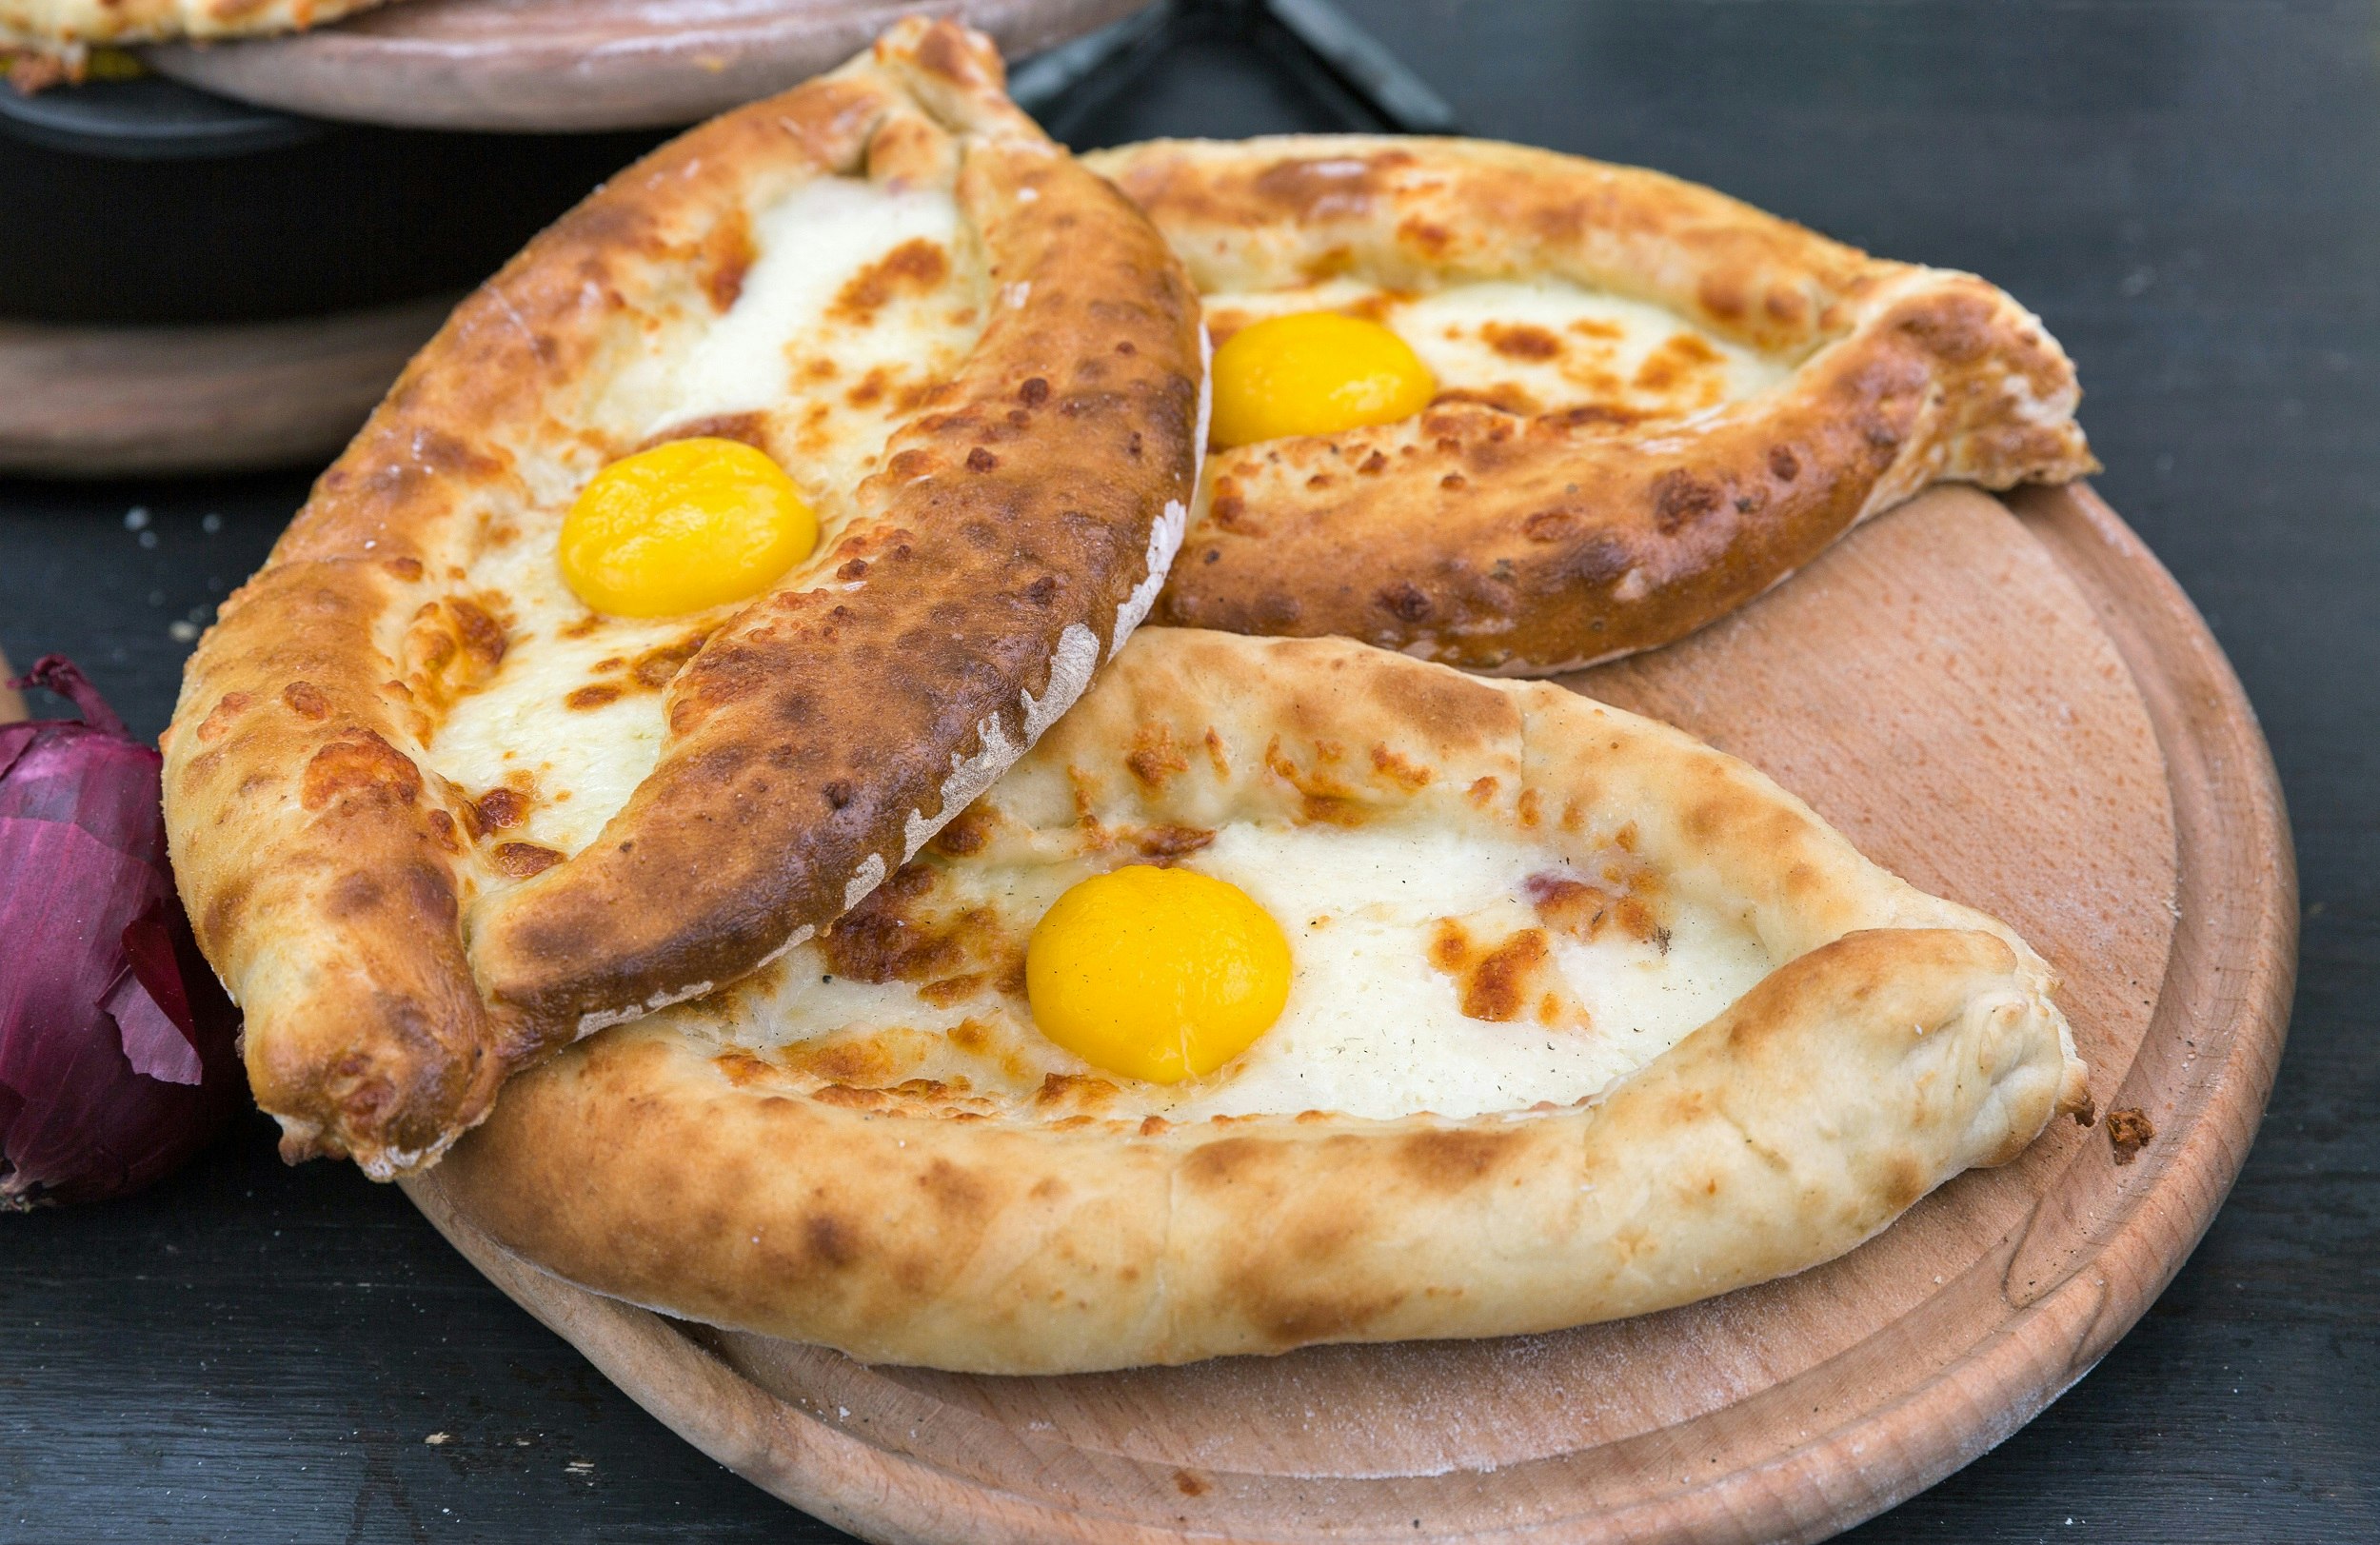 Three boat-shaped pastries with melted cheese and an egg on top